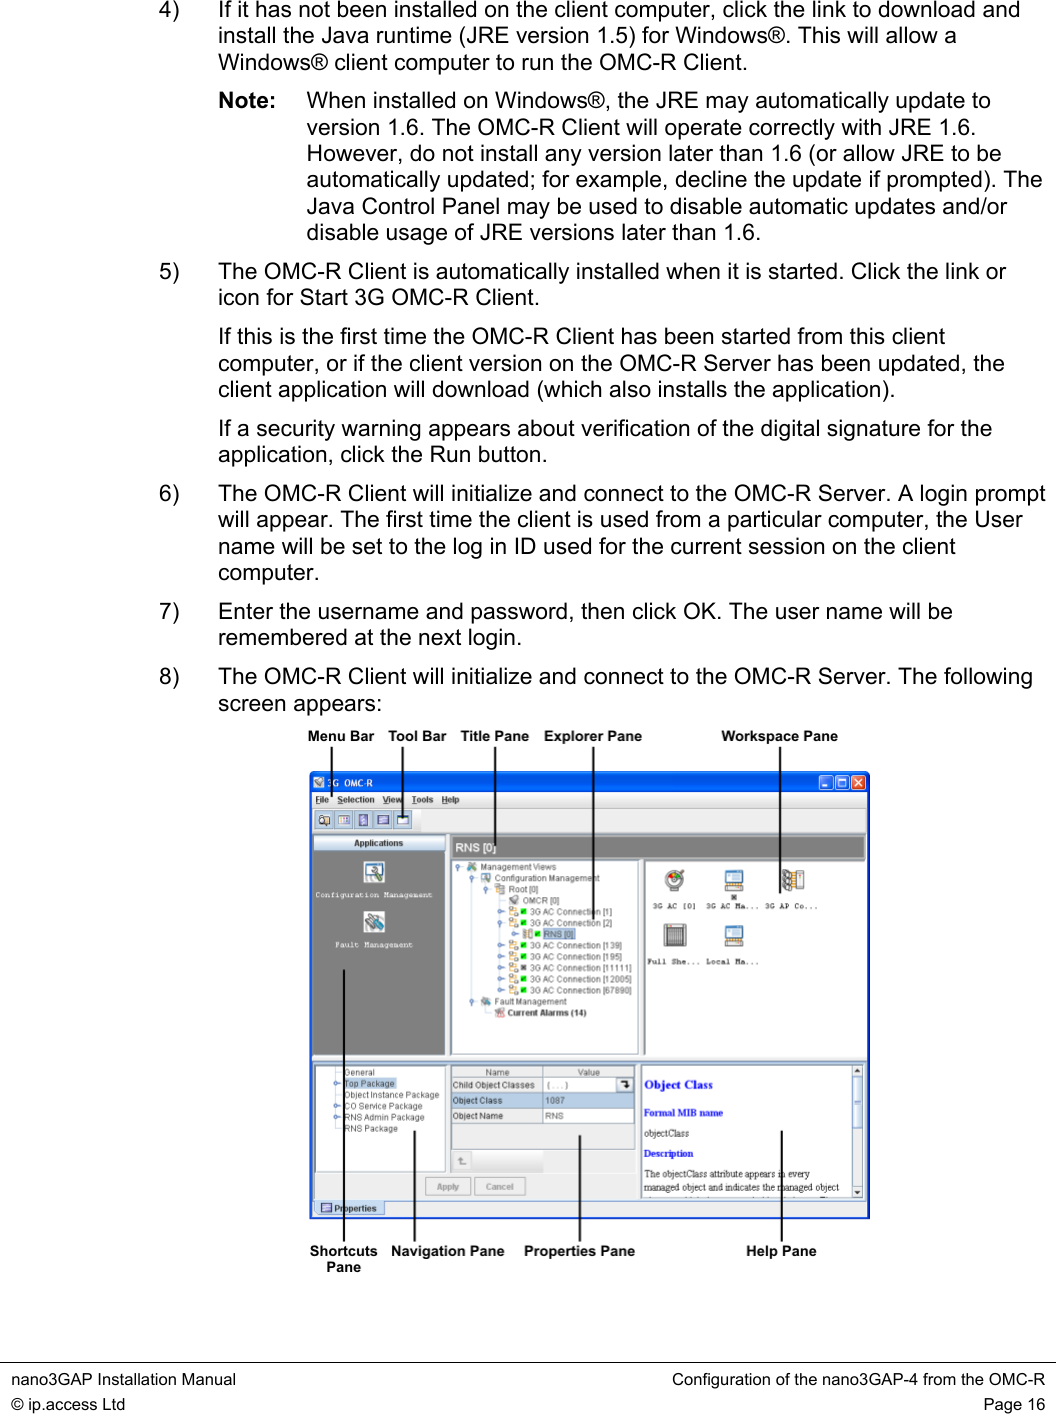  nano3GAP Installation Manual  Configuration of the nano3GAP-4 from the OMC-R © ip.access Ltd  Page 16  4)  If it has not been installed on the client computer, click the link to download and install the Java runtime (JRE version 1.5) for Windows®. This will allow a Windows® client computer to run the OMC-R Client. Note:  When installed on Windows®, the JRE may automatically update to version 1.6. The OMC-R Client will operate correctly with JRE 1.6. However, do not install any version later than 1.6 (or allow JRE to be automatically updated; for example, decline the update if prompted). The Java Control Panel may be used to disable automatic updates and/or disable usage of JRE versions later than 1.6. 5)  The OMC-R Client is automatically installed when it is started. Click the link or icon for Start 3G OMC-R Client. If this is the first time the OMC-R Client has been started from this client computer, or if the client version on the OMC-R Server has been updated, the client application will download (which also installs the application). If a security warning appears about verification of the digital signature for the application, click the Run button. 6)  The OMC-R Client will initialize and connect to the OMC-R Server. A login prompt will appear. The first time the client is used from a particular computer, the User name will be set to the log in ID used for the current session on the client computer. 7)  Enter the username and password, then click OK. The user name will be remembered at the next login. 8)  The OMC-R Client will initialize and connect to the OMC-R Server. The following screen appears:  